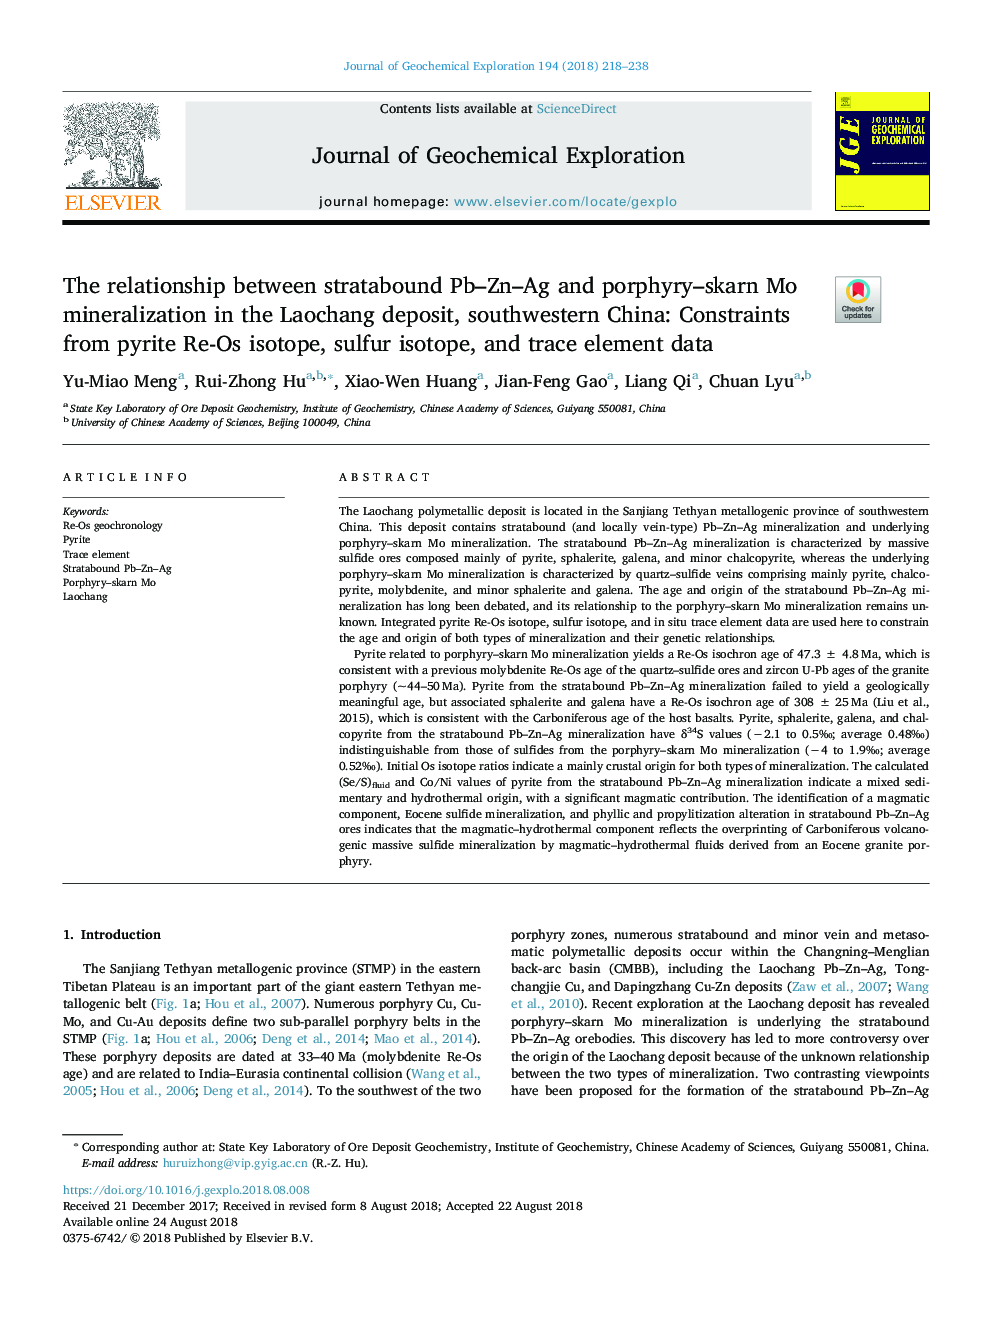 The relationship between stratabound Pb-Zn-Ag and porphyry-skarn Mo mineralization in the Laochang deposit, southwestern China: Constraints from pyrite Re-Os isotope, sulfur isotope, and trace element data